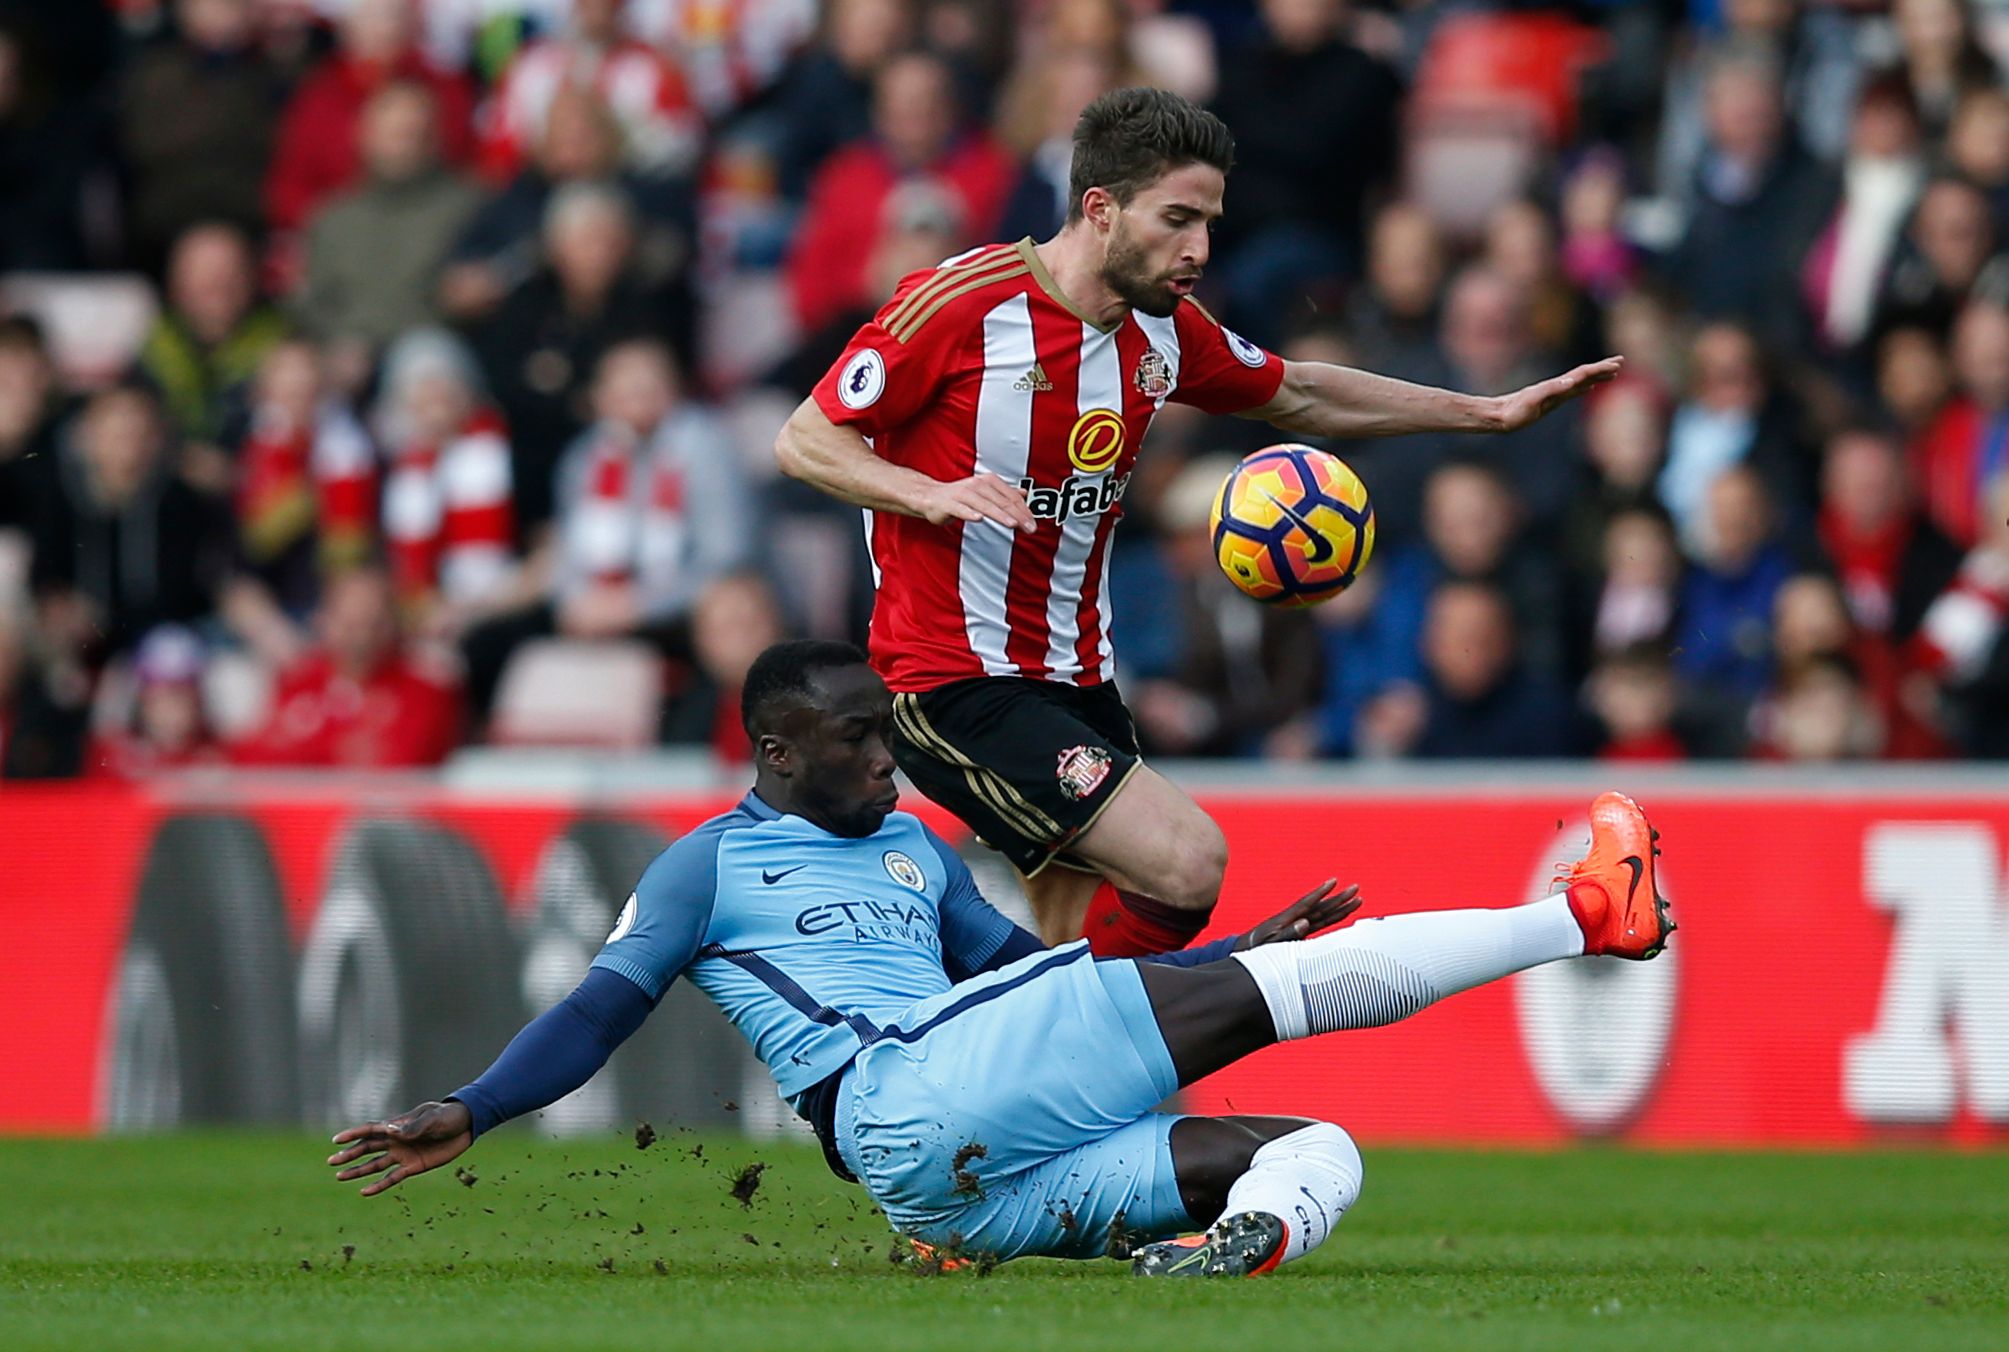 Manchester City's Bacary Sagna in action with Sunderland's Fabio Borini